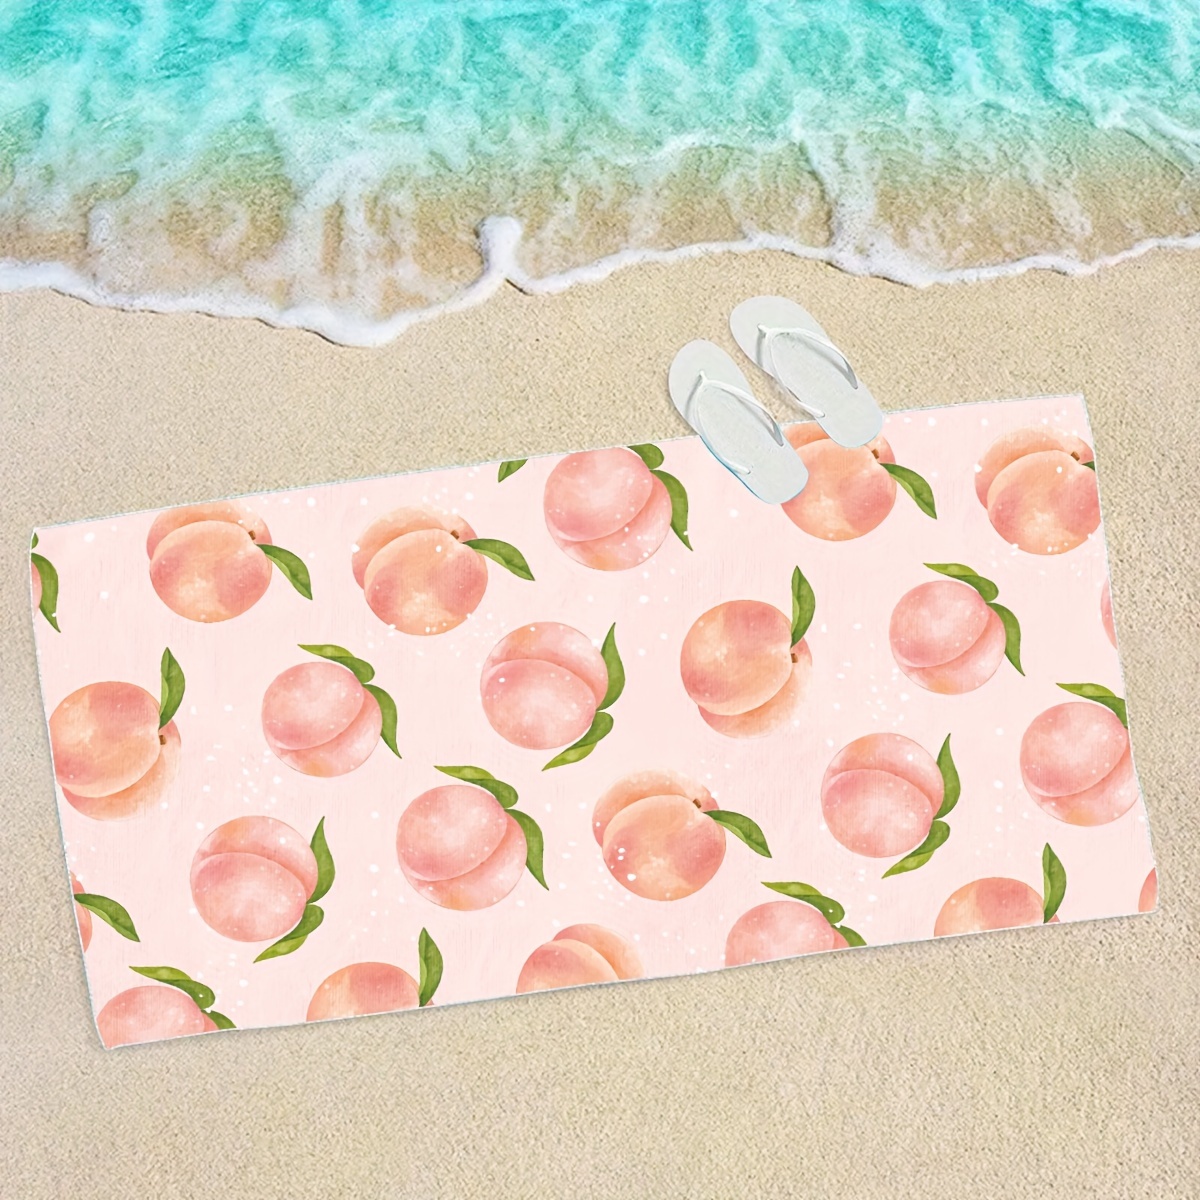 

Peaches Beach Towel, Quick Dry Lightweight Bath Towel, Soft Microfiber Swim Towel, Pool Towel, Shower Towel, Absorbent, Summer Accessory, Perfect For Outdoor, Sport, Travel, Beach, Pool